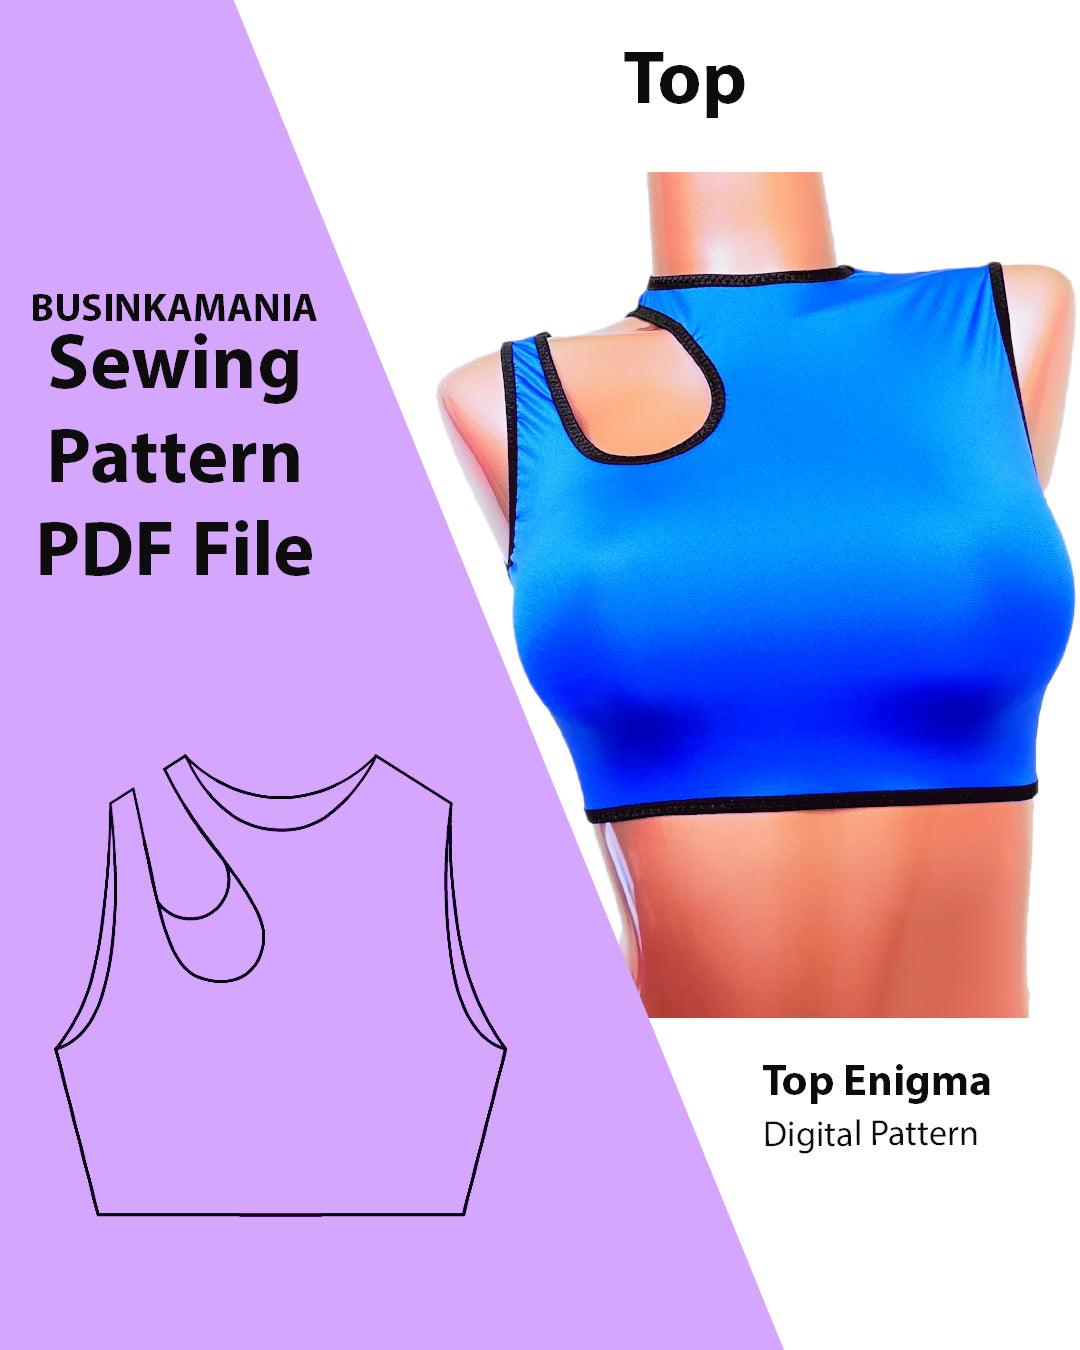 Top Enigma Sewing Pattern